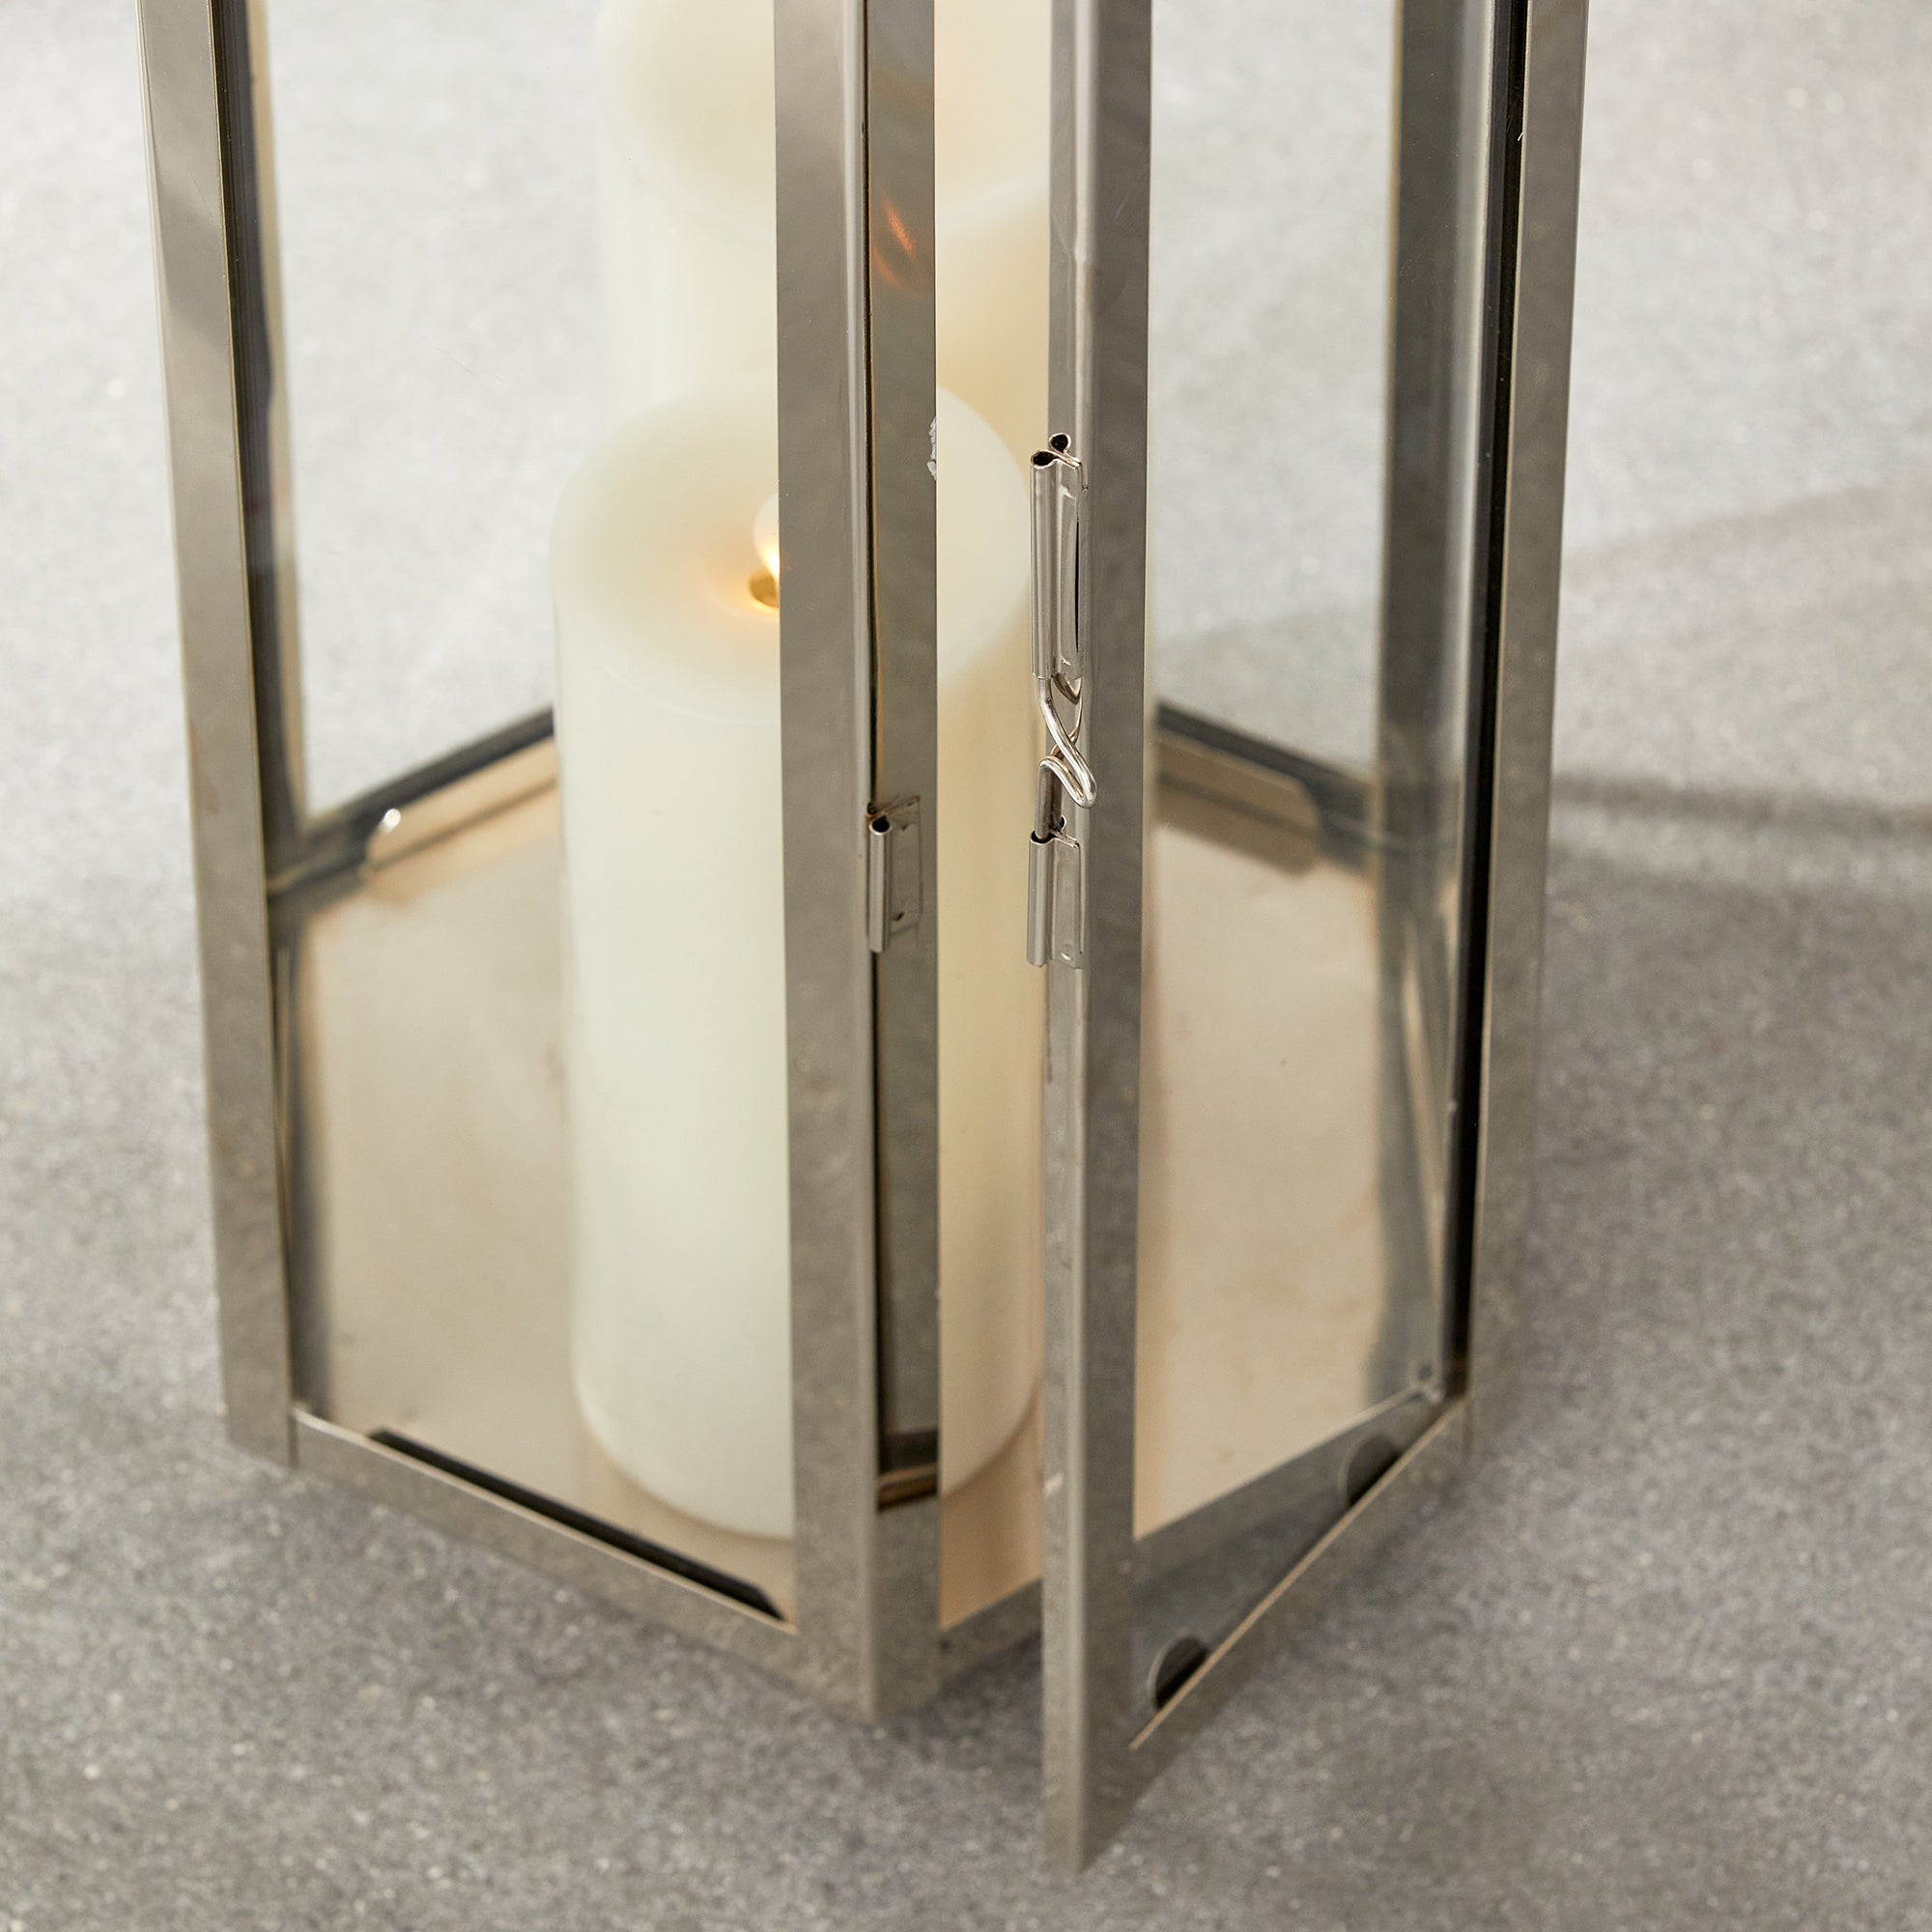 This six panel lantern is made of stainless steel and natural teak handles. Impressive in scale, it is a great accent along the mantle, or on an entry console. Amethyst Home provides interior design, new construction, custom furniture, and area rugs in the Washington metro area.